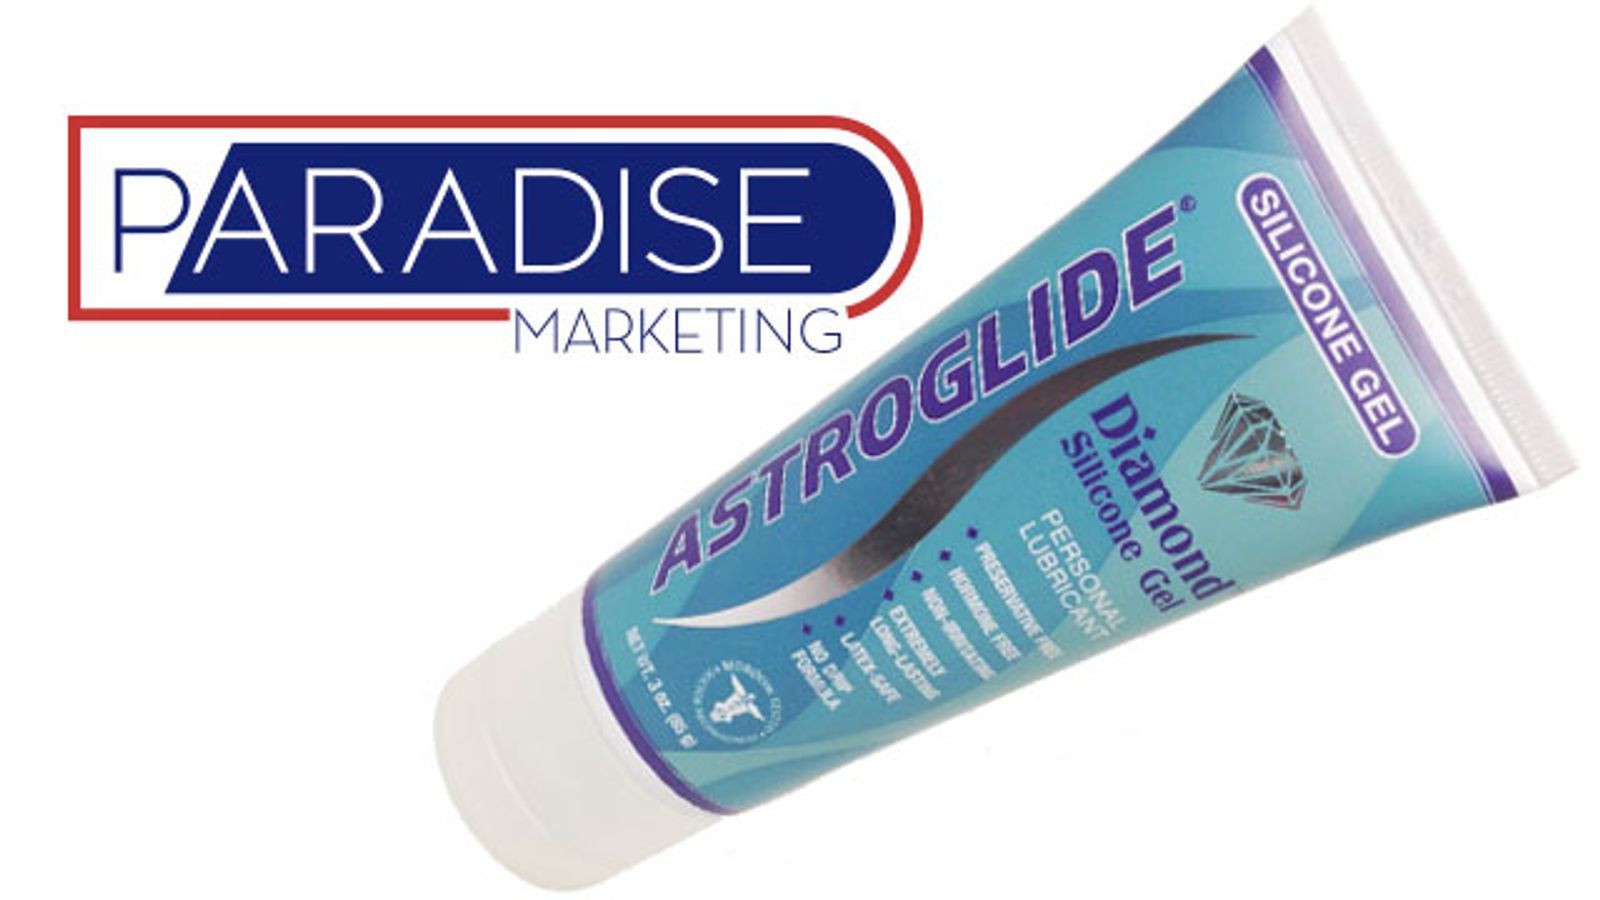 Paradise Marketing Debuts First Silicone Gel Lubricant from Astroglide